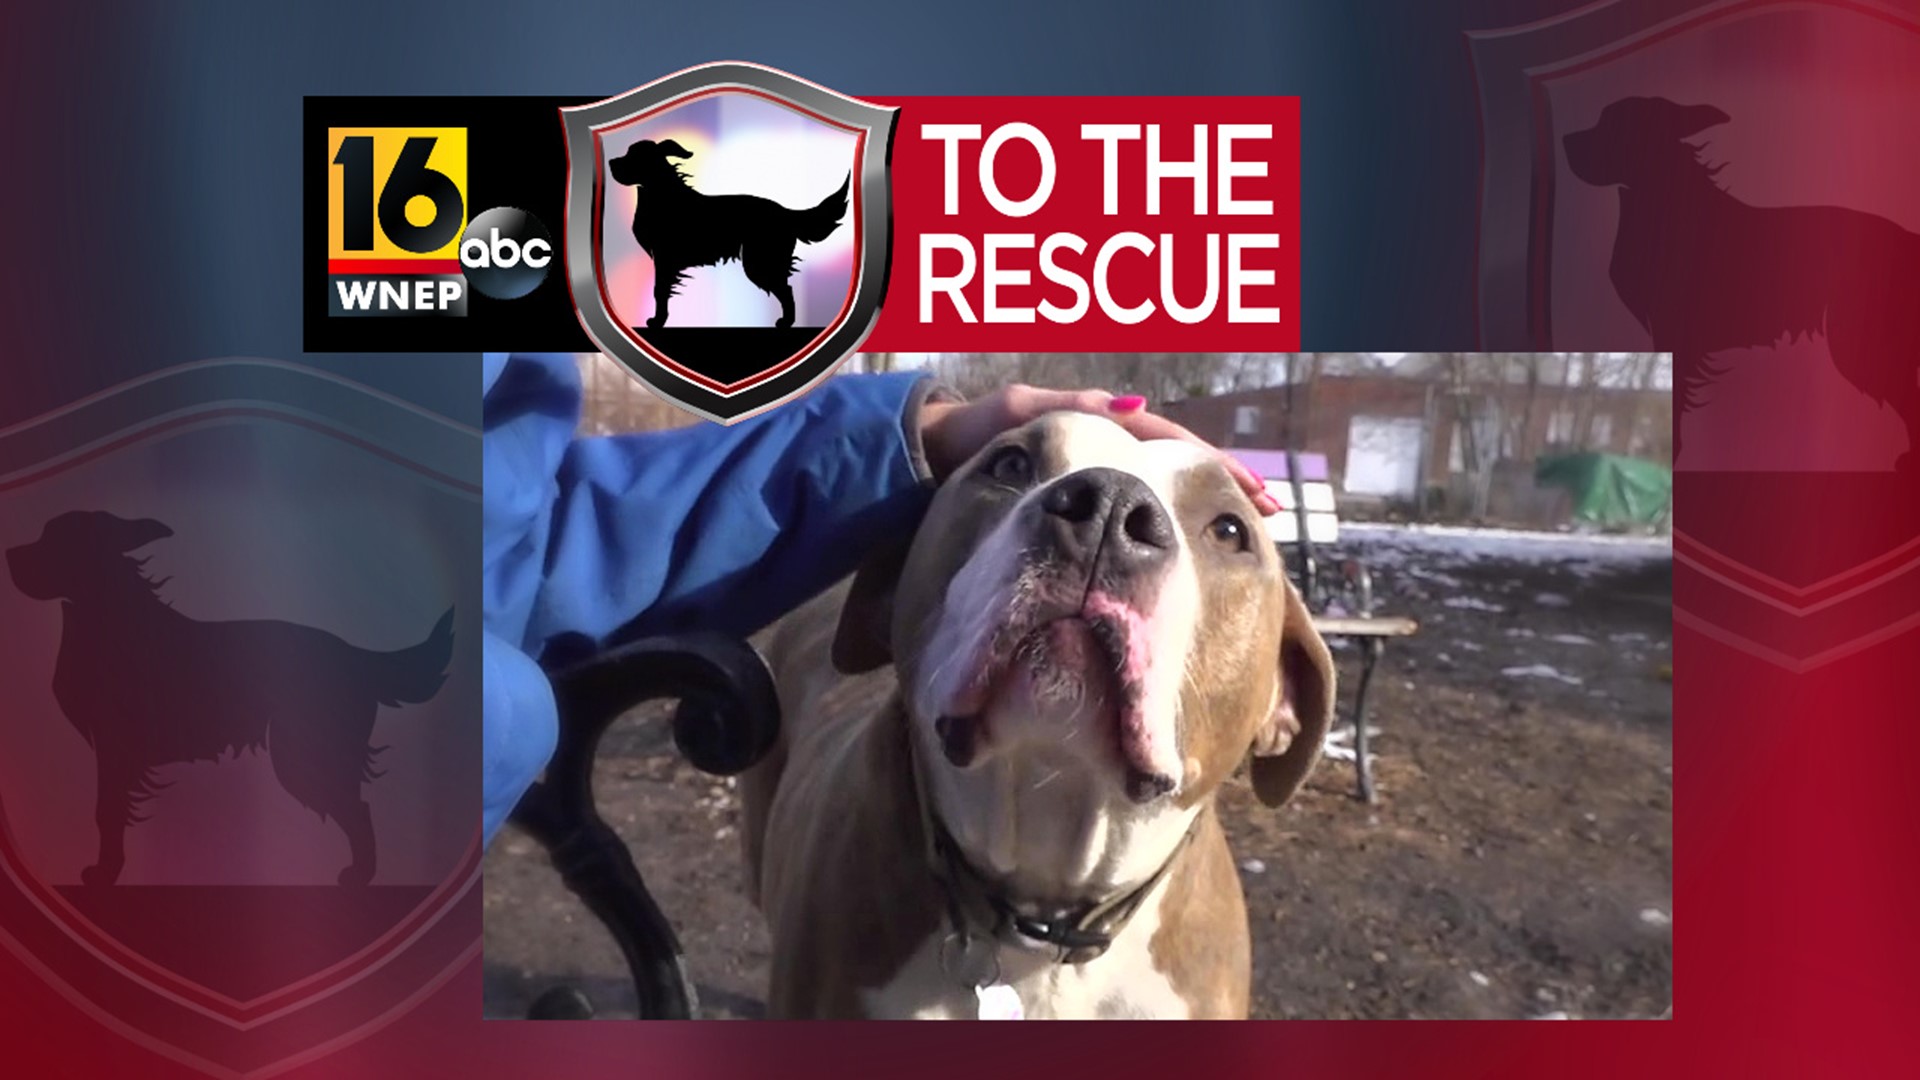 In this week's 16 To The Rescue, we meet probably the sweetest 100-pound pup you'll ever see. Newswatch 16's Ally Gallo introduces us to the 3-year-old Bulliet.